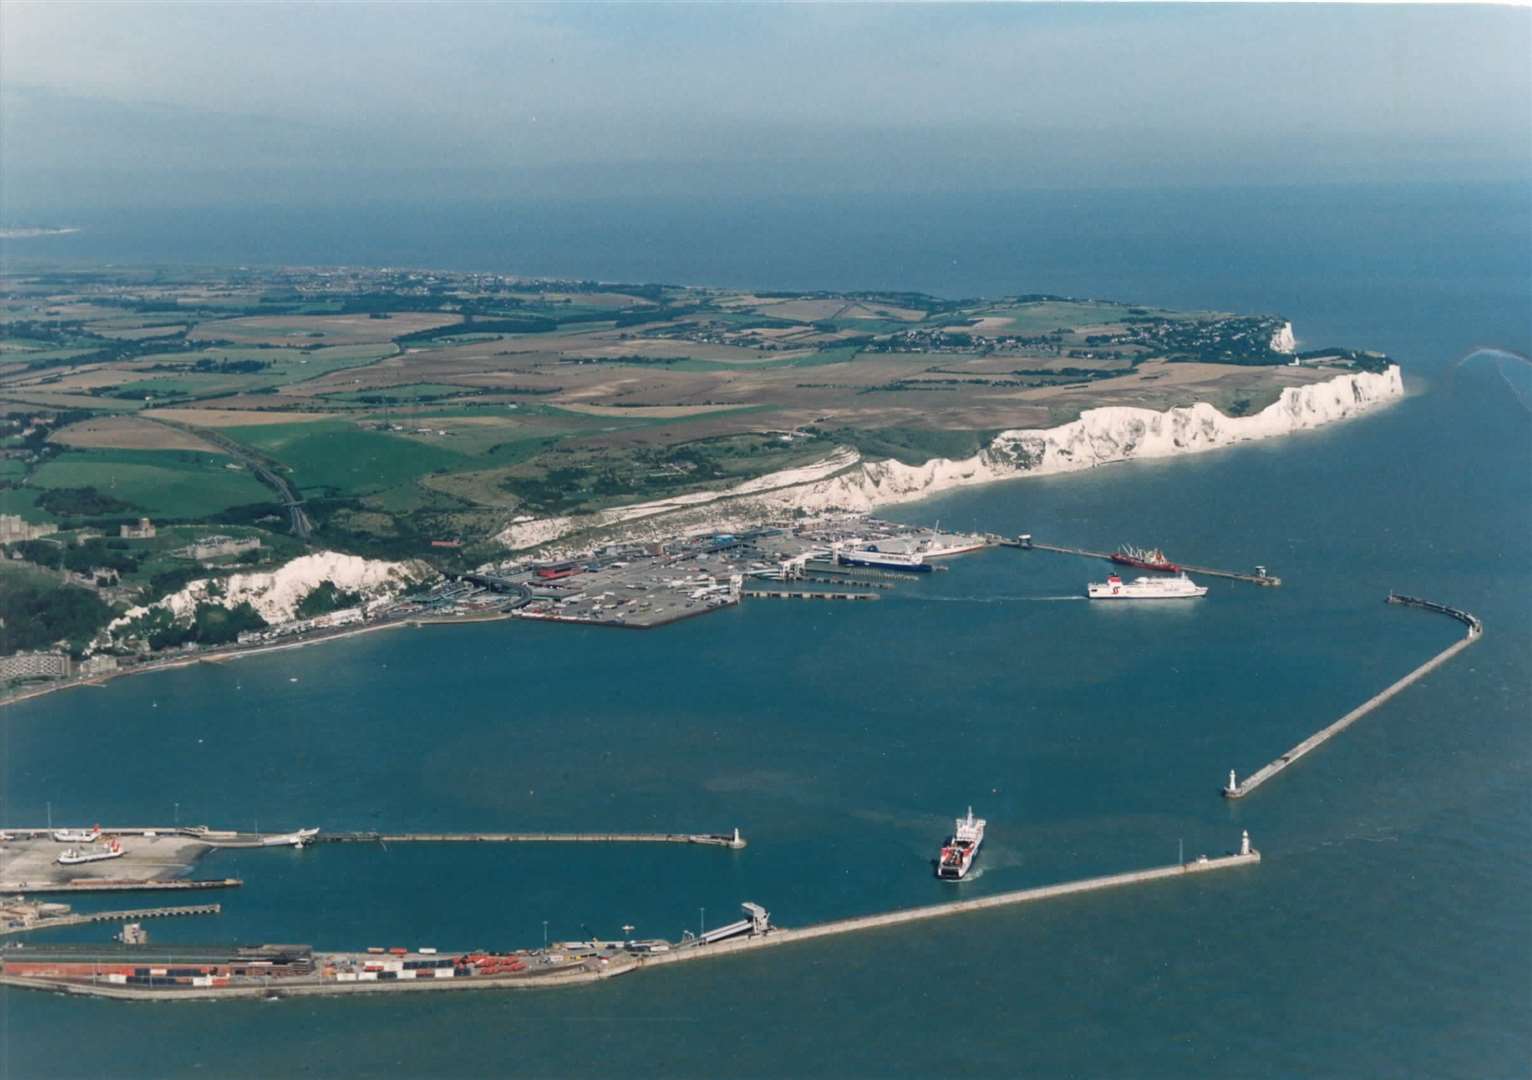 Dover's port, harbour and world famous cliffs pictured in 1995